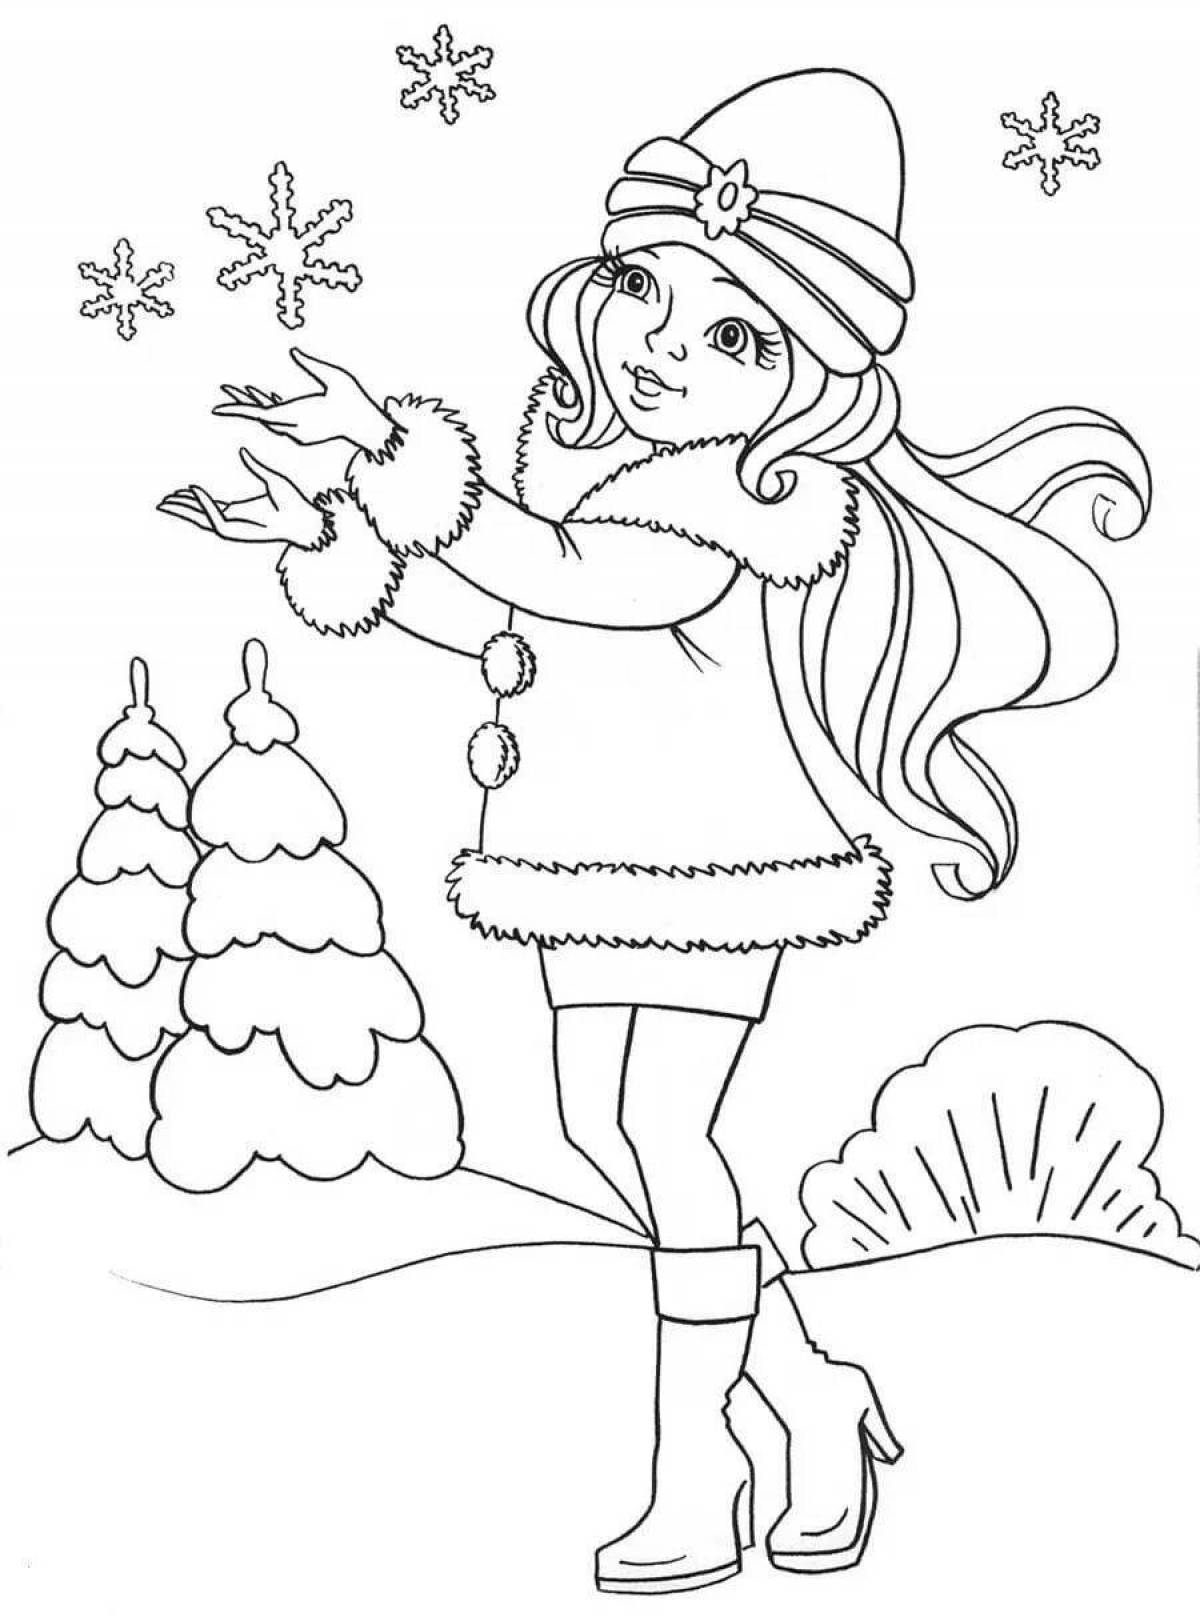 Adorable Christmas coloring book for 10 year old girls